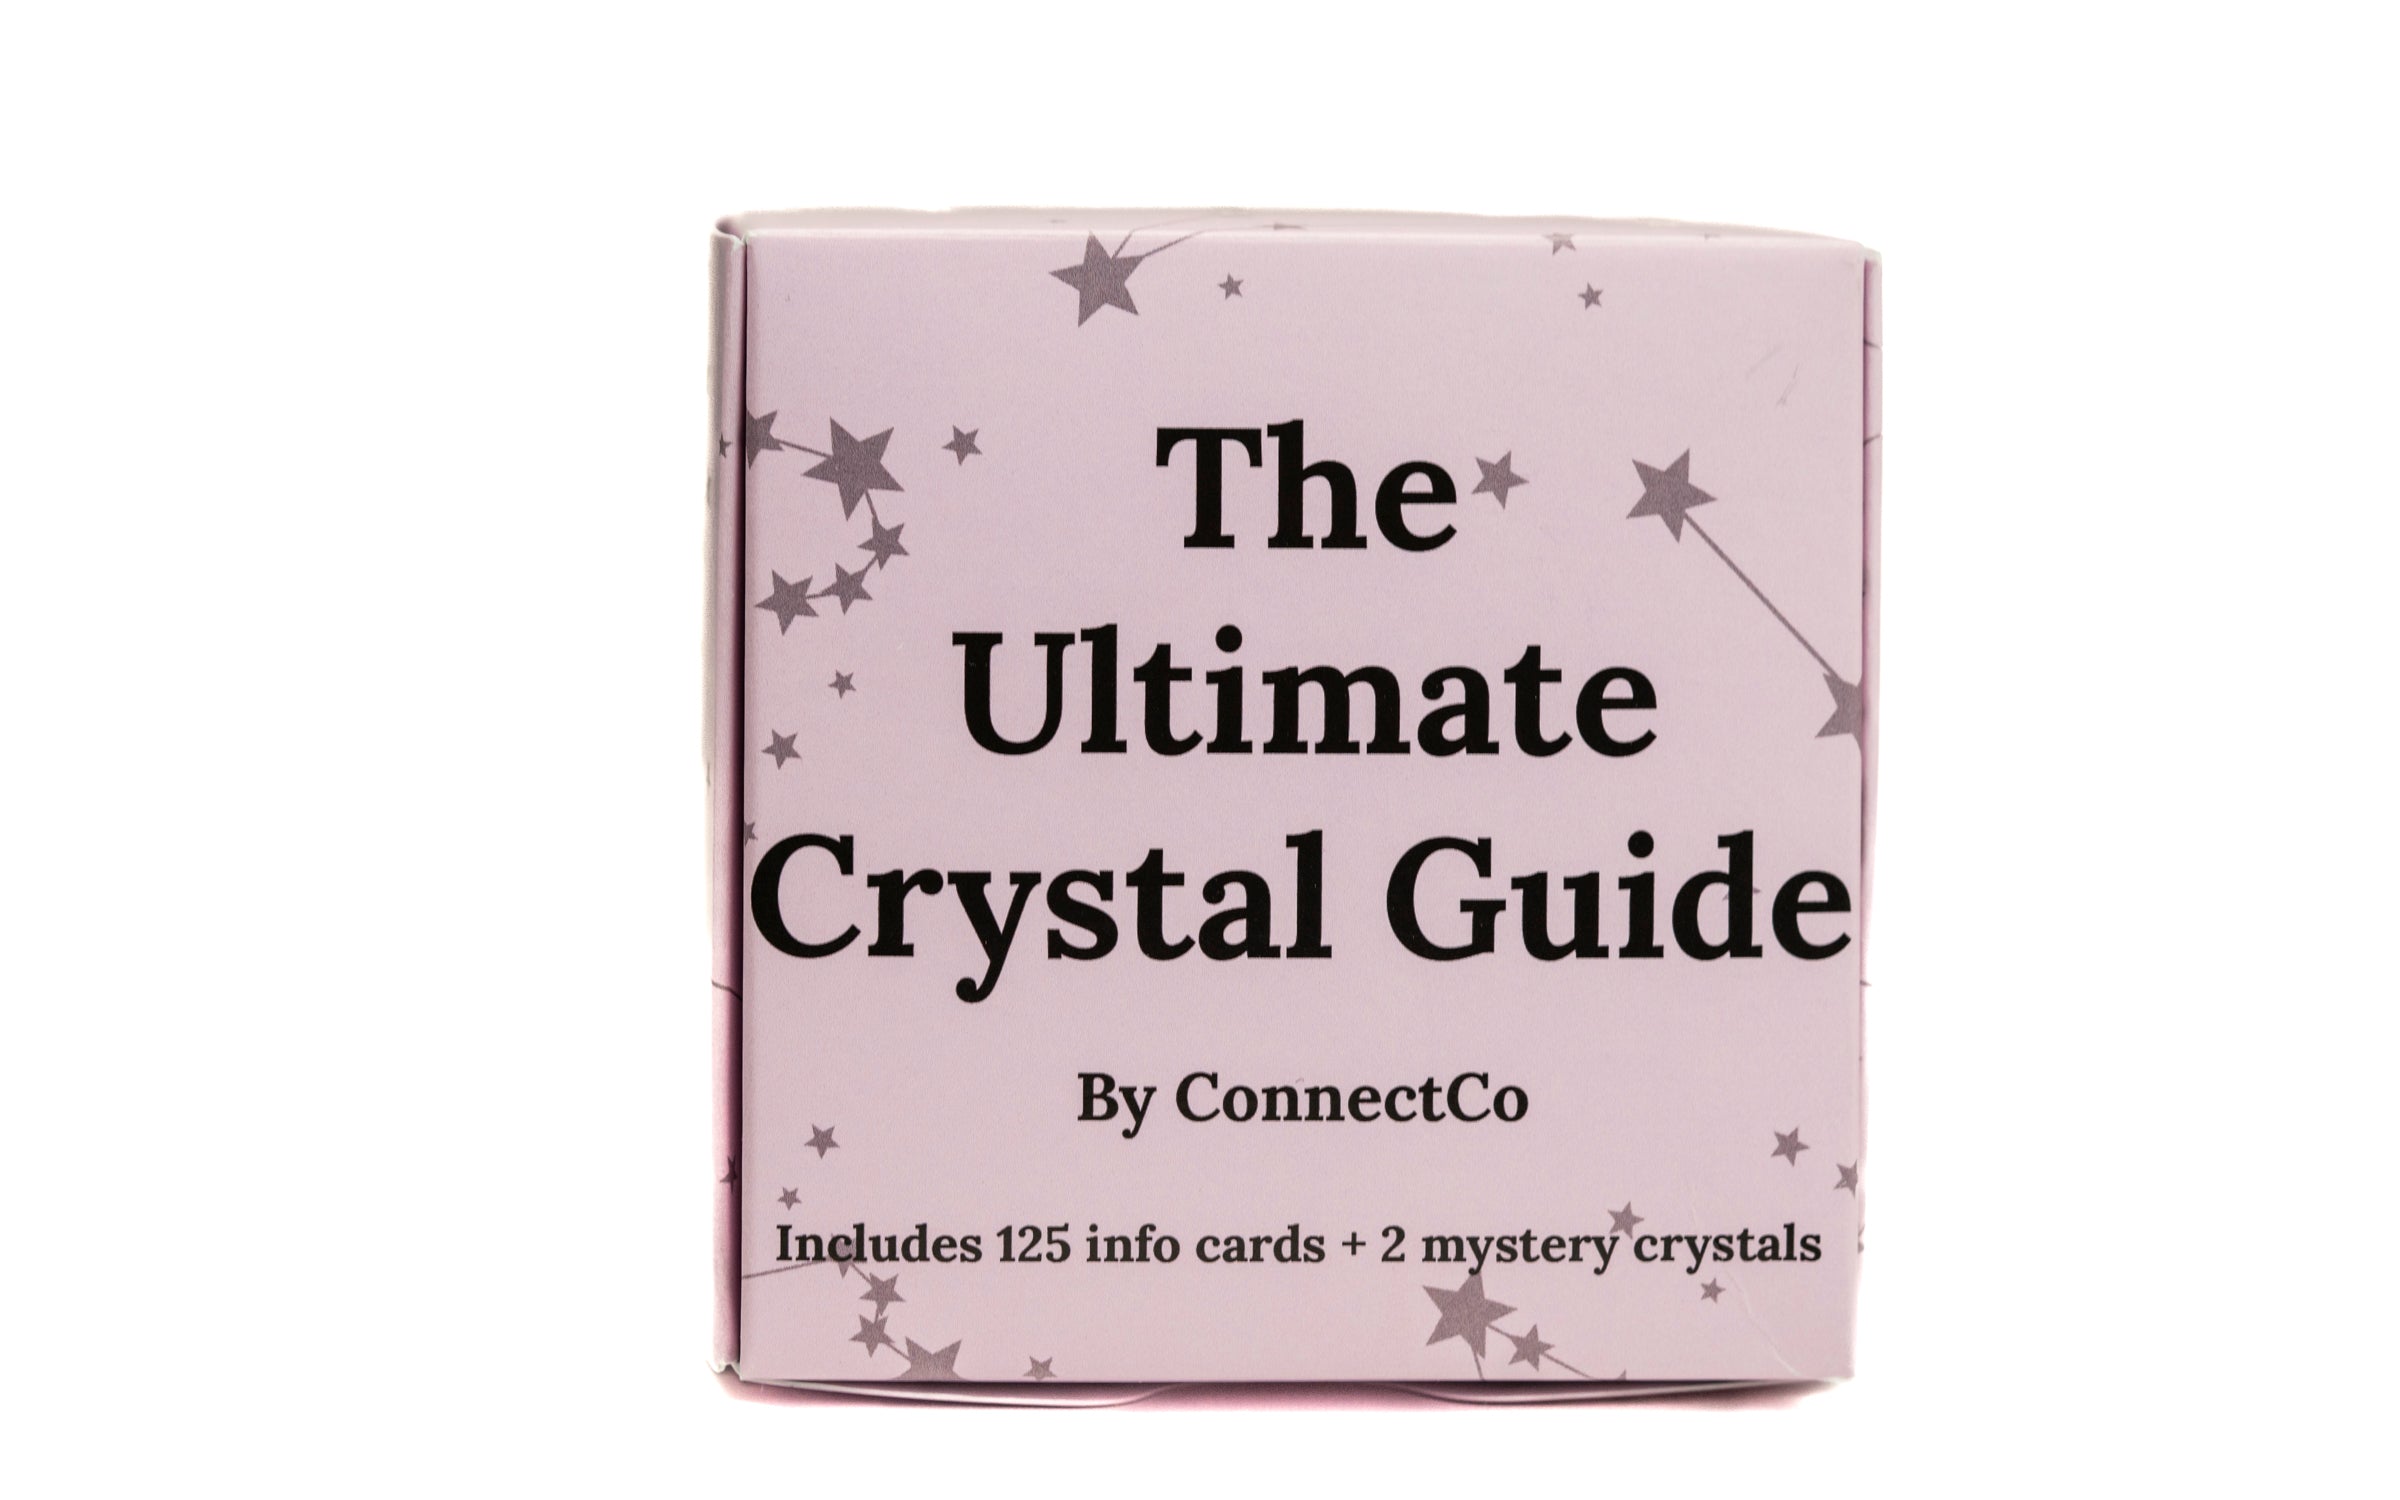 The Ultimate Crystal Guide